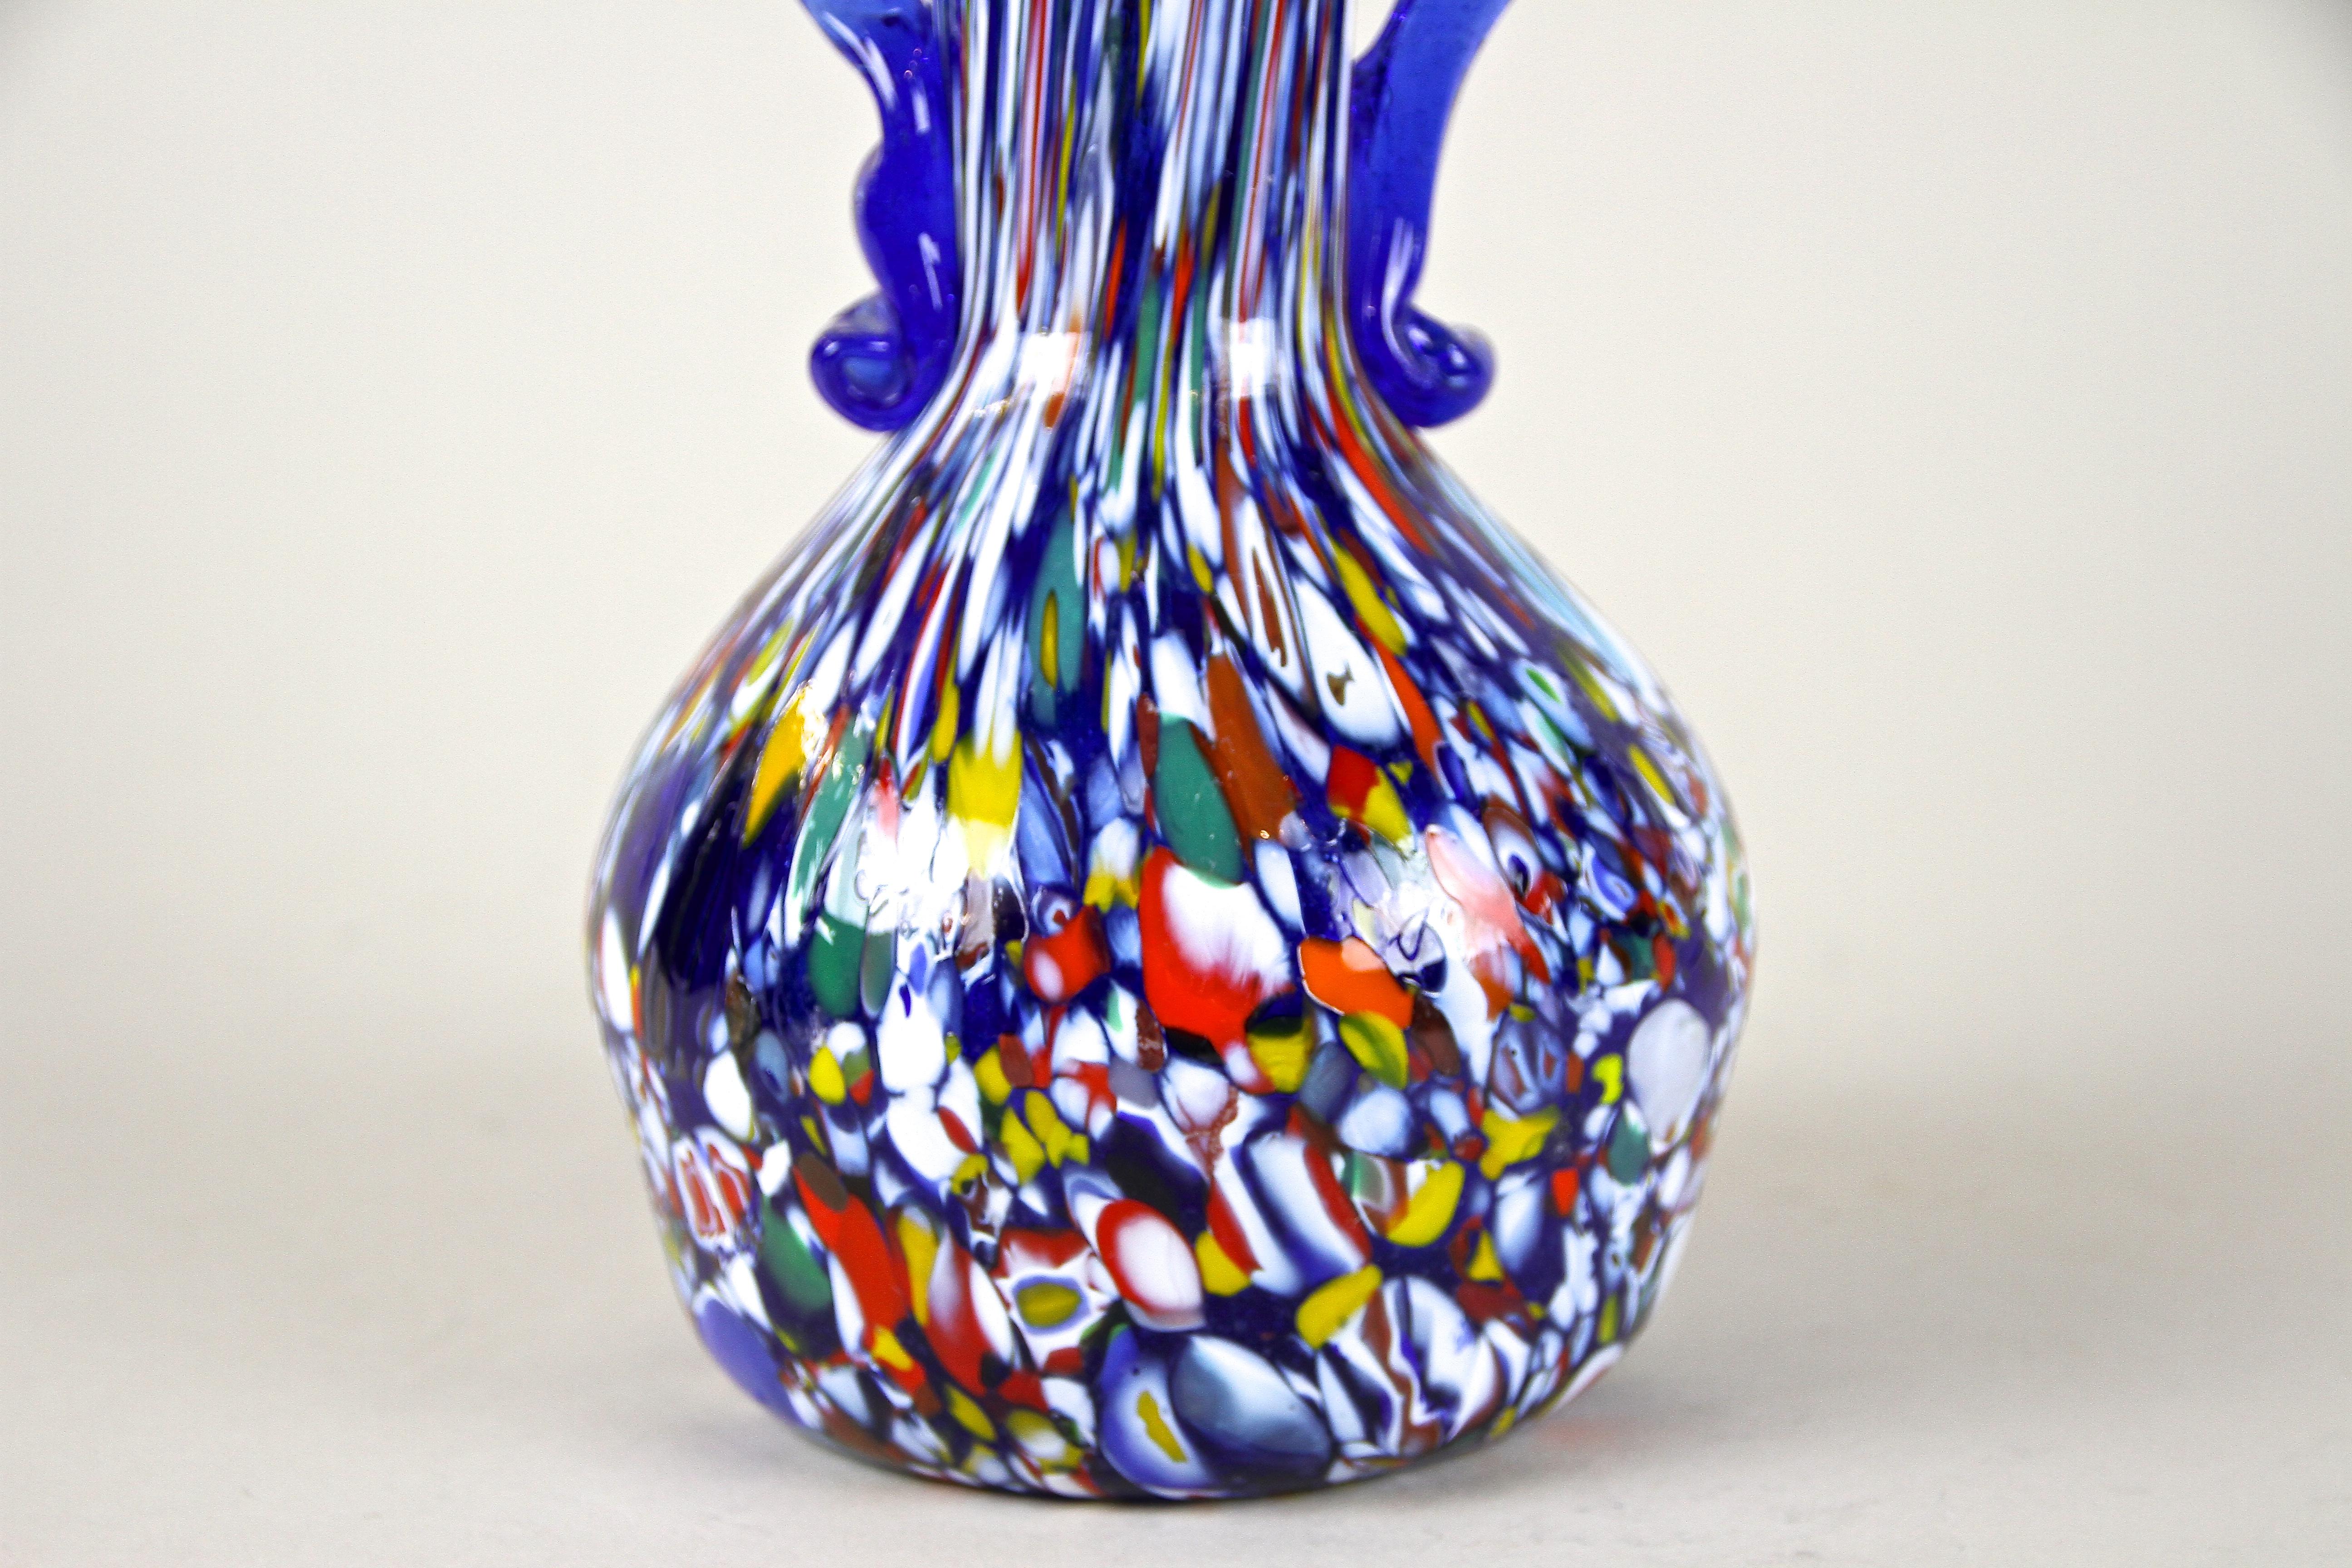 Colorful, unusual Murano glass vase from the workshops of Fratelli Toso around 1940/50. Elaborately hand crafted in the mid 1900s on the island of Murano, this unusual piece of glass art impresses with a beautiful shaped, dark blue core body adorned